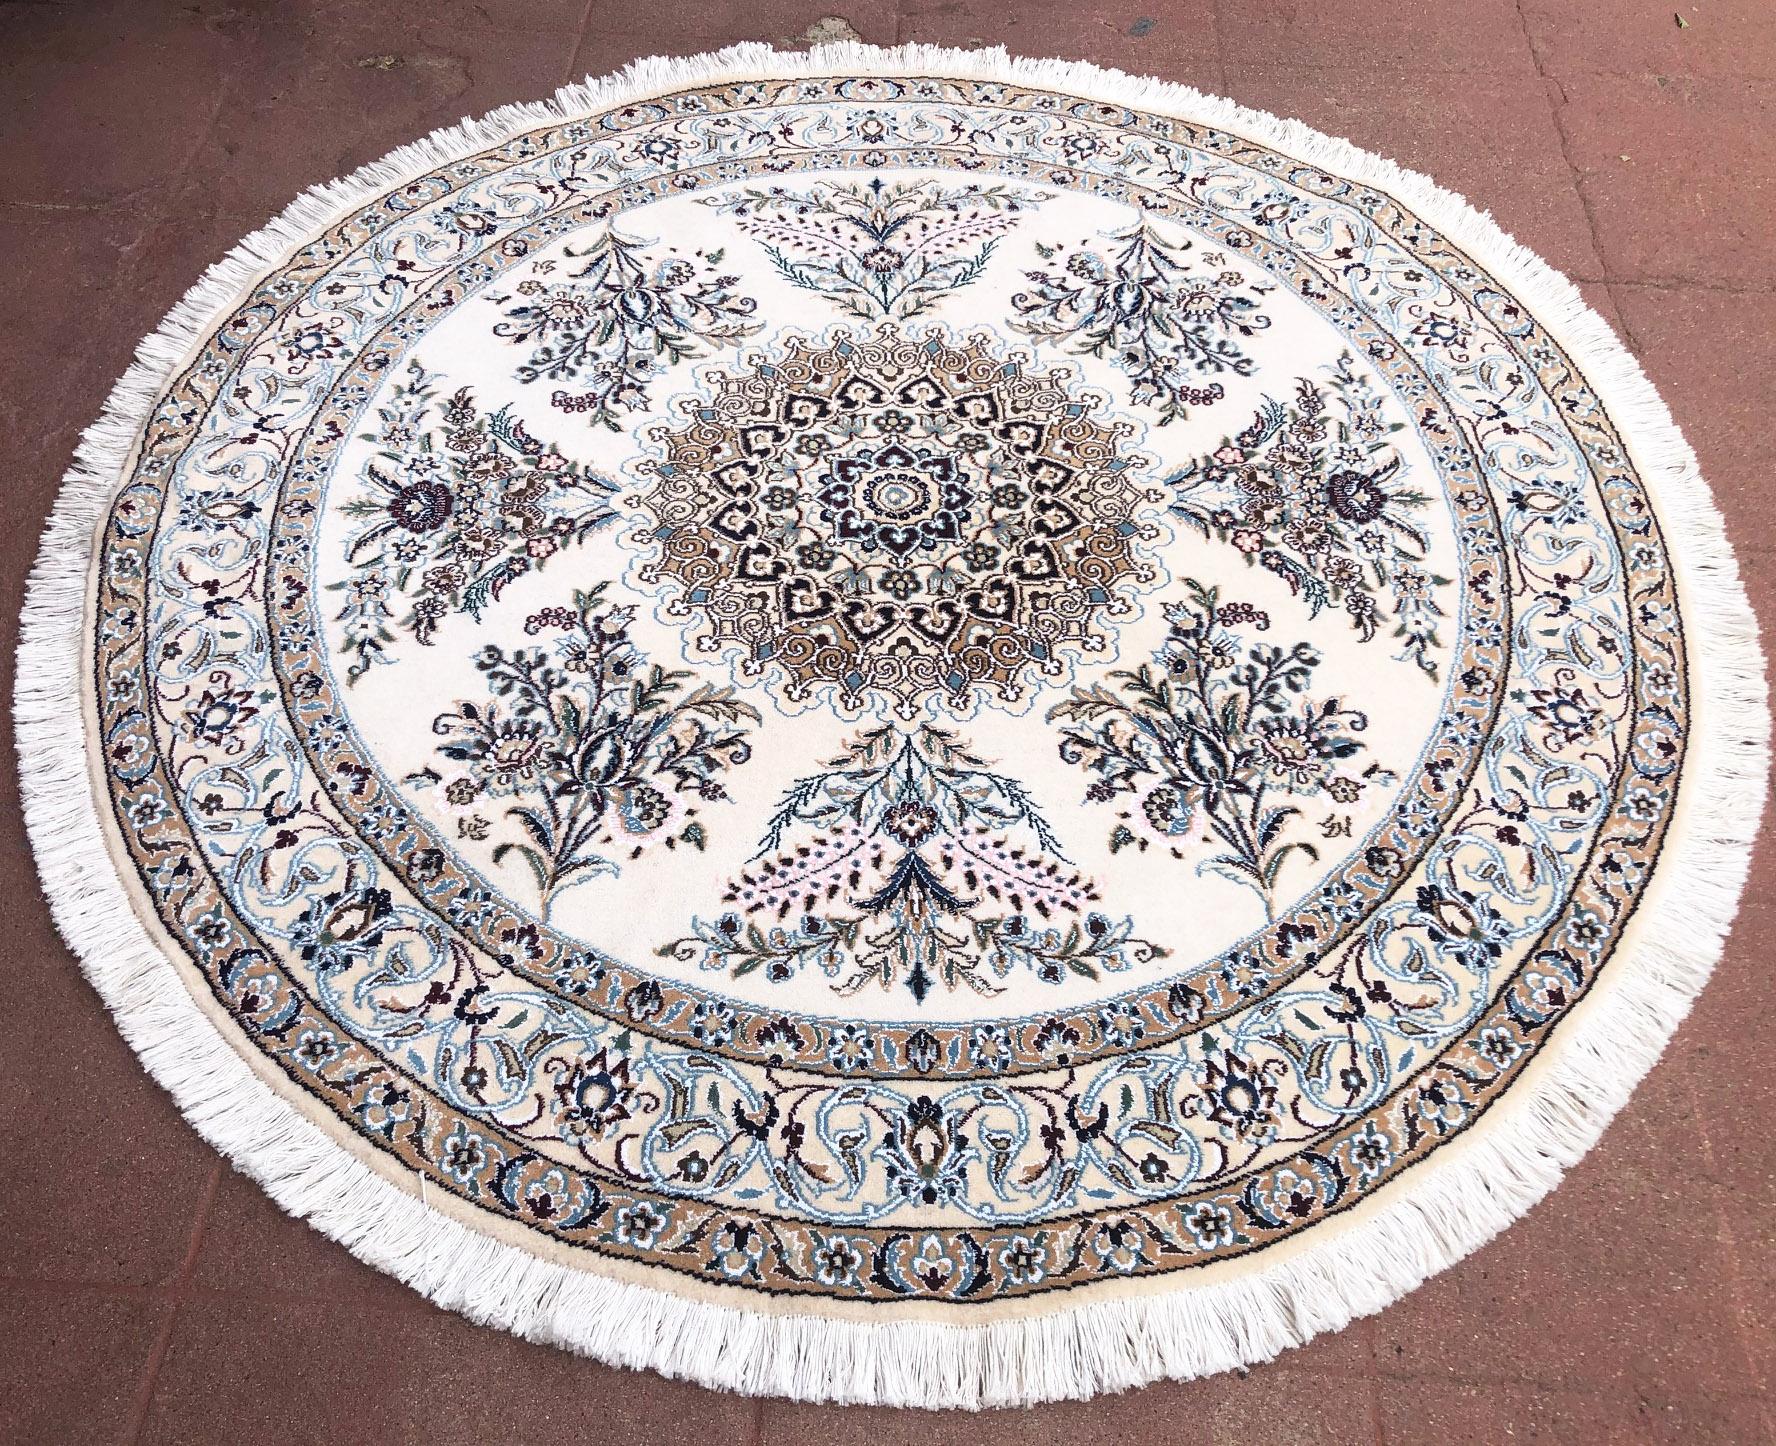 This authentic Persian round handmade Nain (9 LA) rug has wool and silk pile with cotton foundation. Nain is a city in Iran that is well known for producing fine handmade rug. This rug has medallion floral design. The base and border colors are